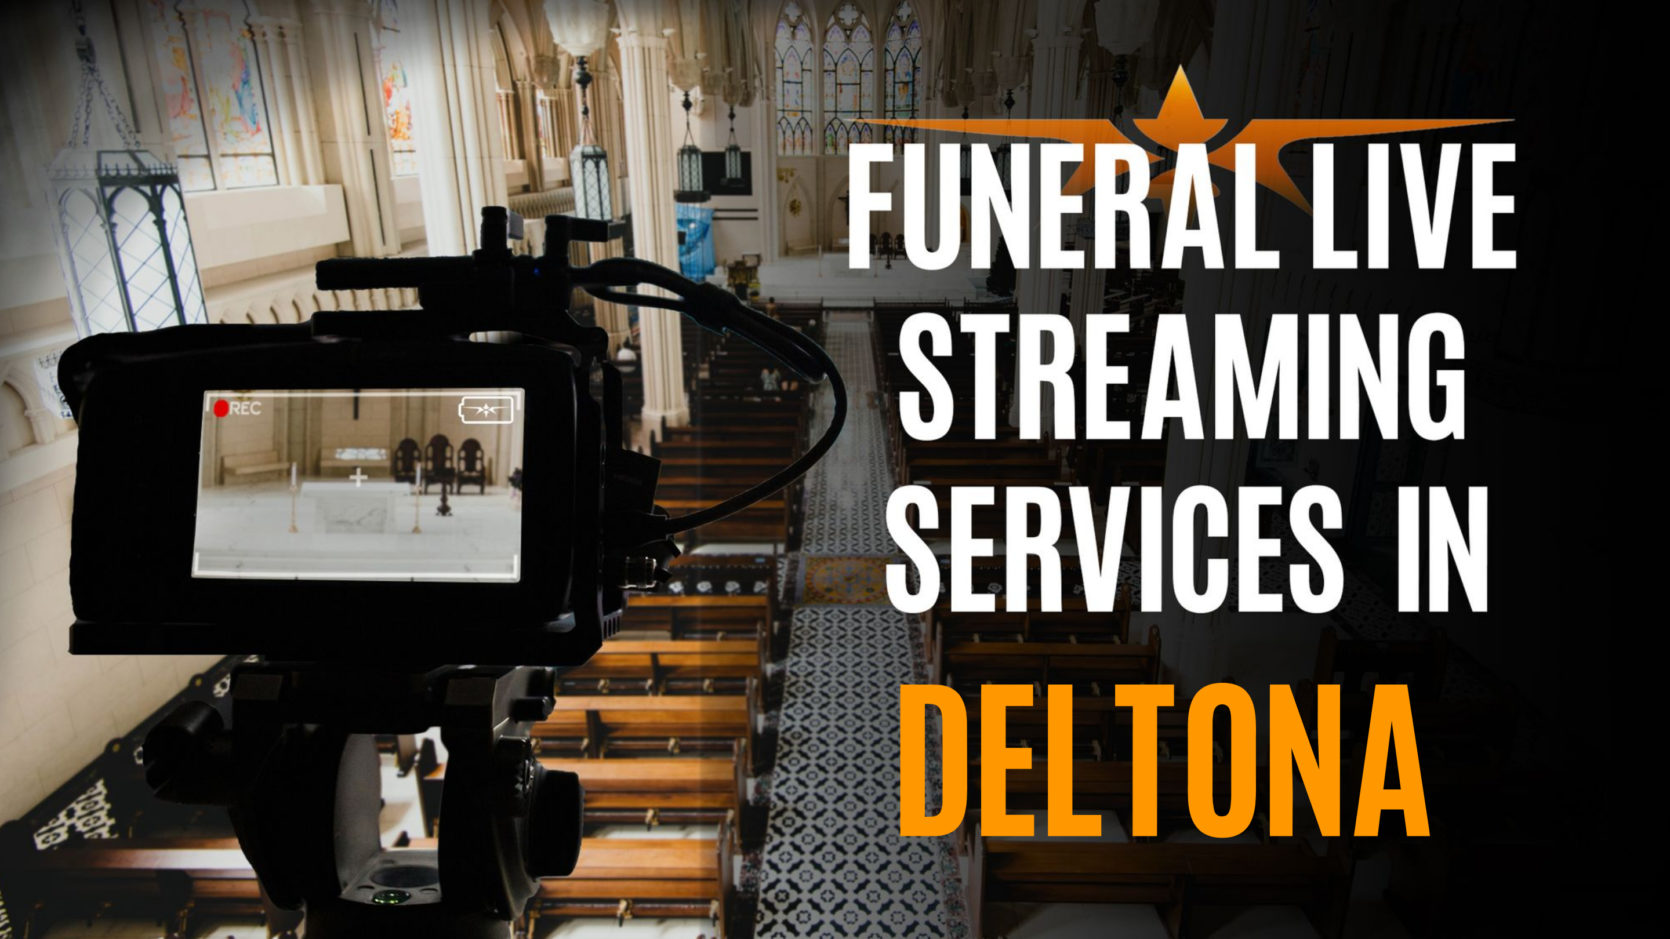 Funeral Live Streaming Services In Deltona